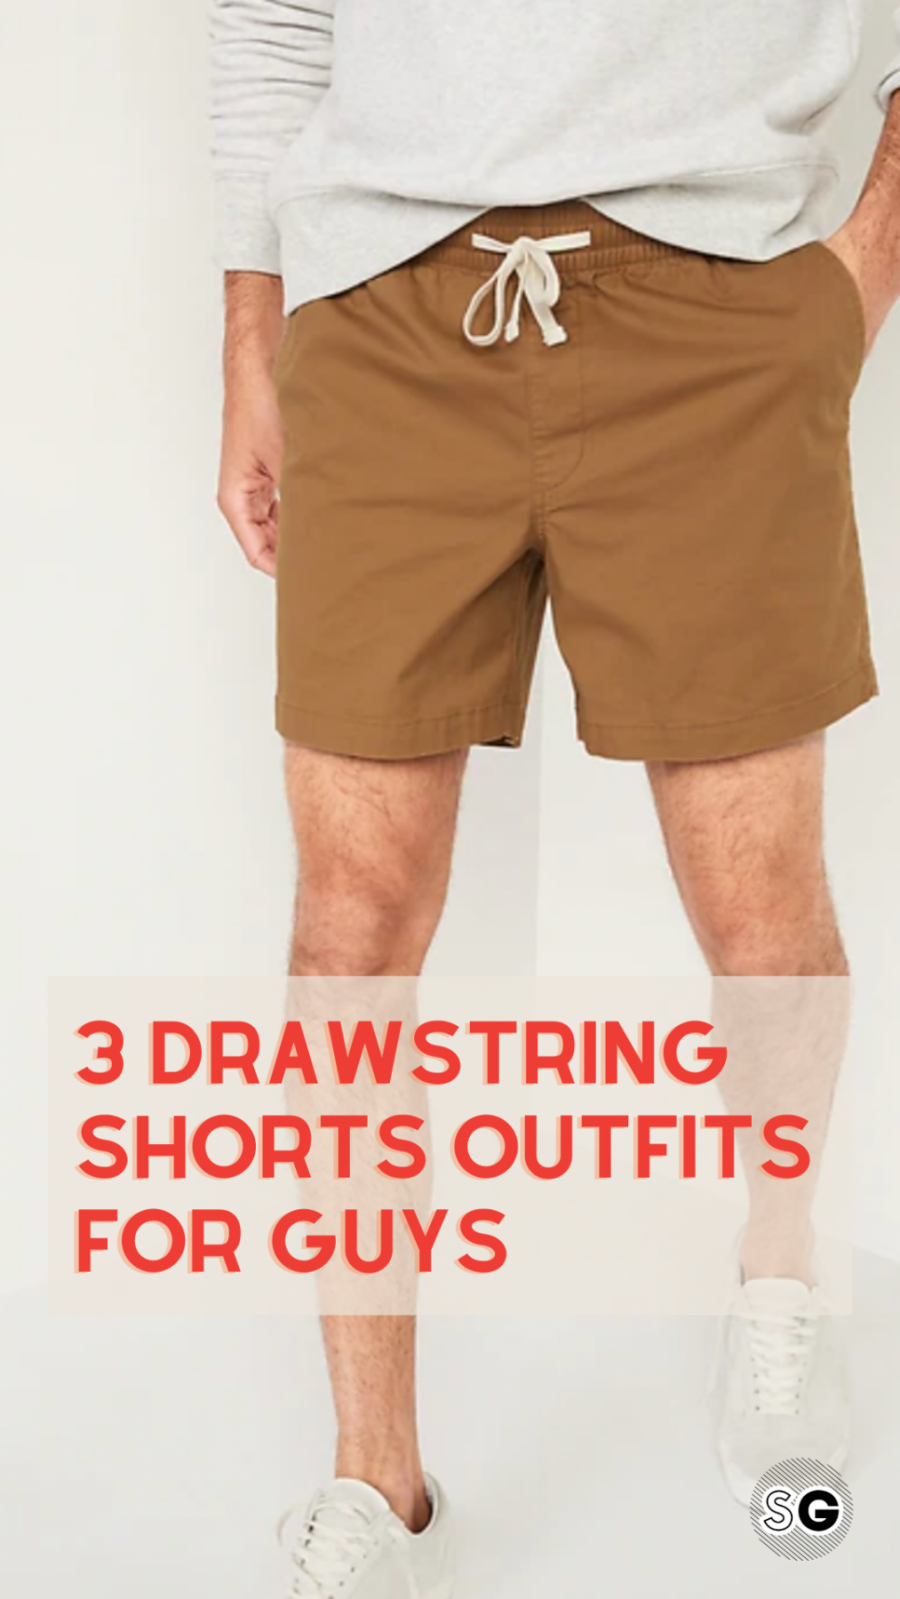 3 Drawstring Shorts Outfits for Guys